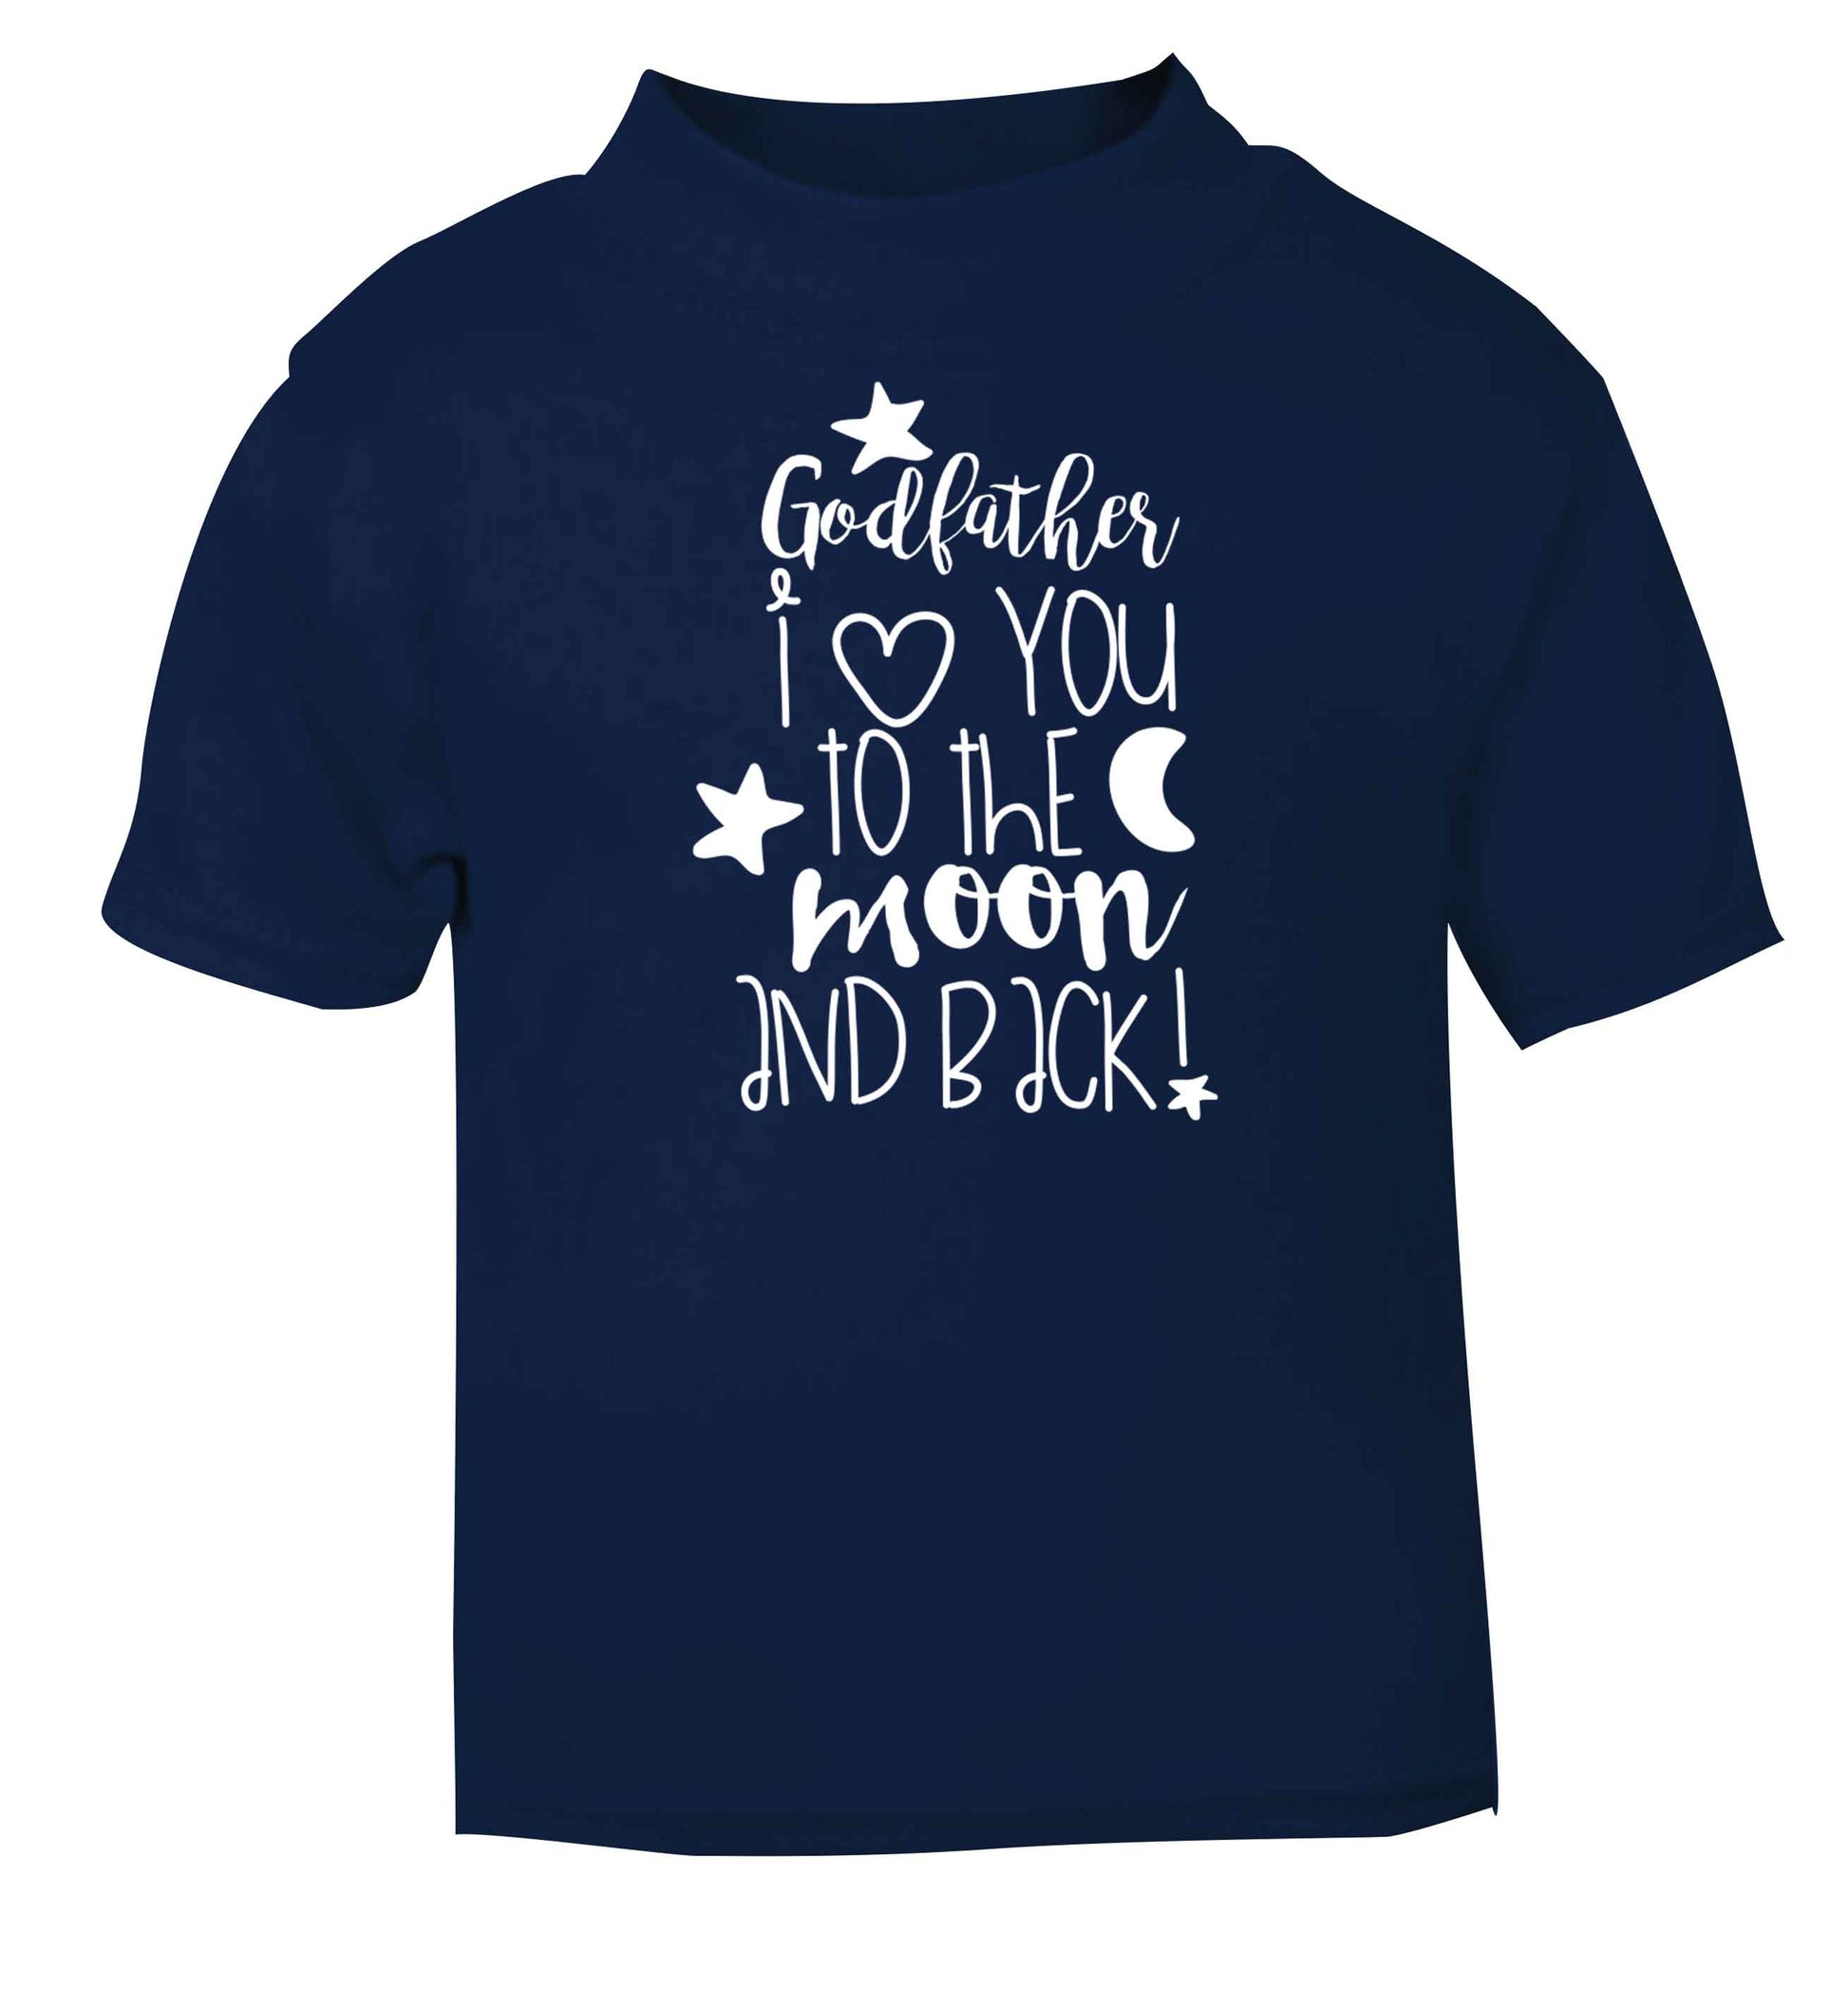 Godfather I love you to the moon and back navy baby toddler Tshirt 2 Years